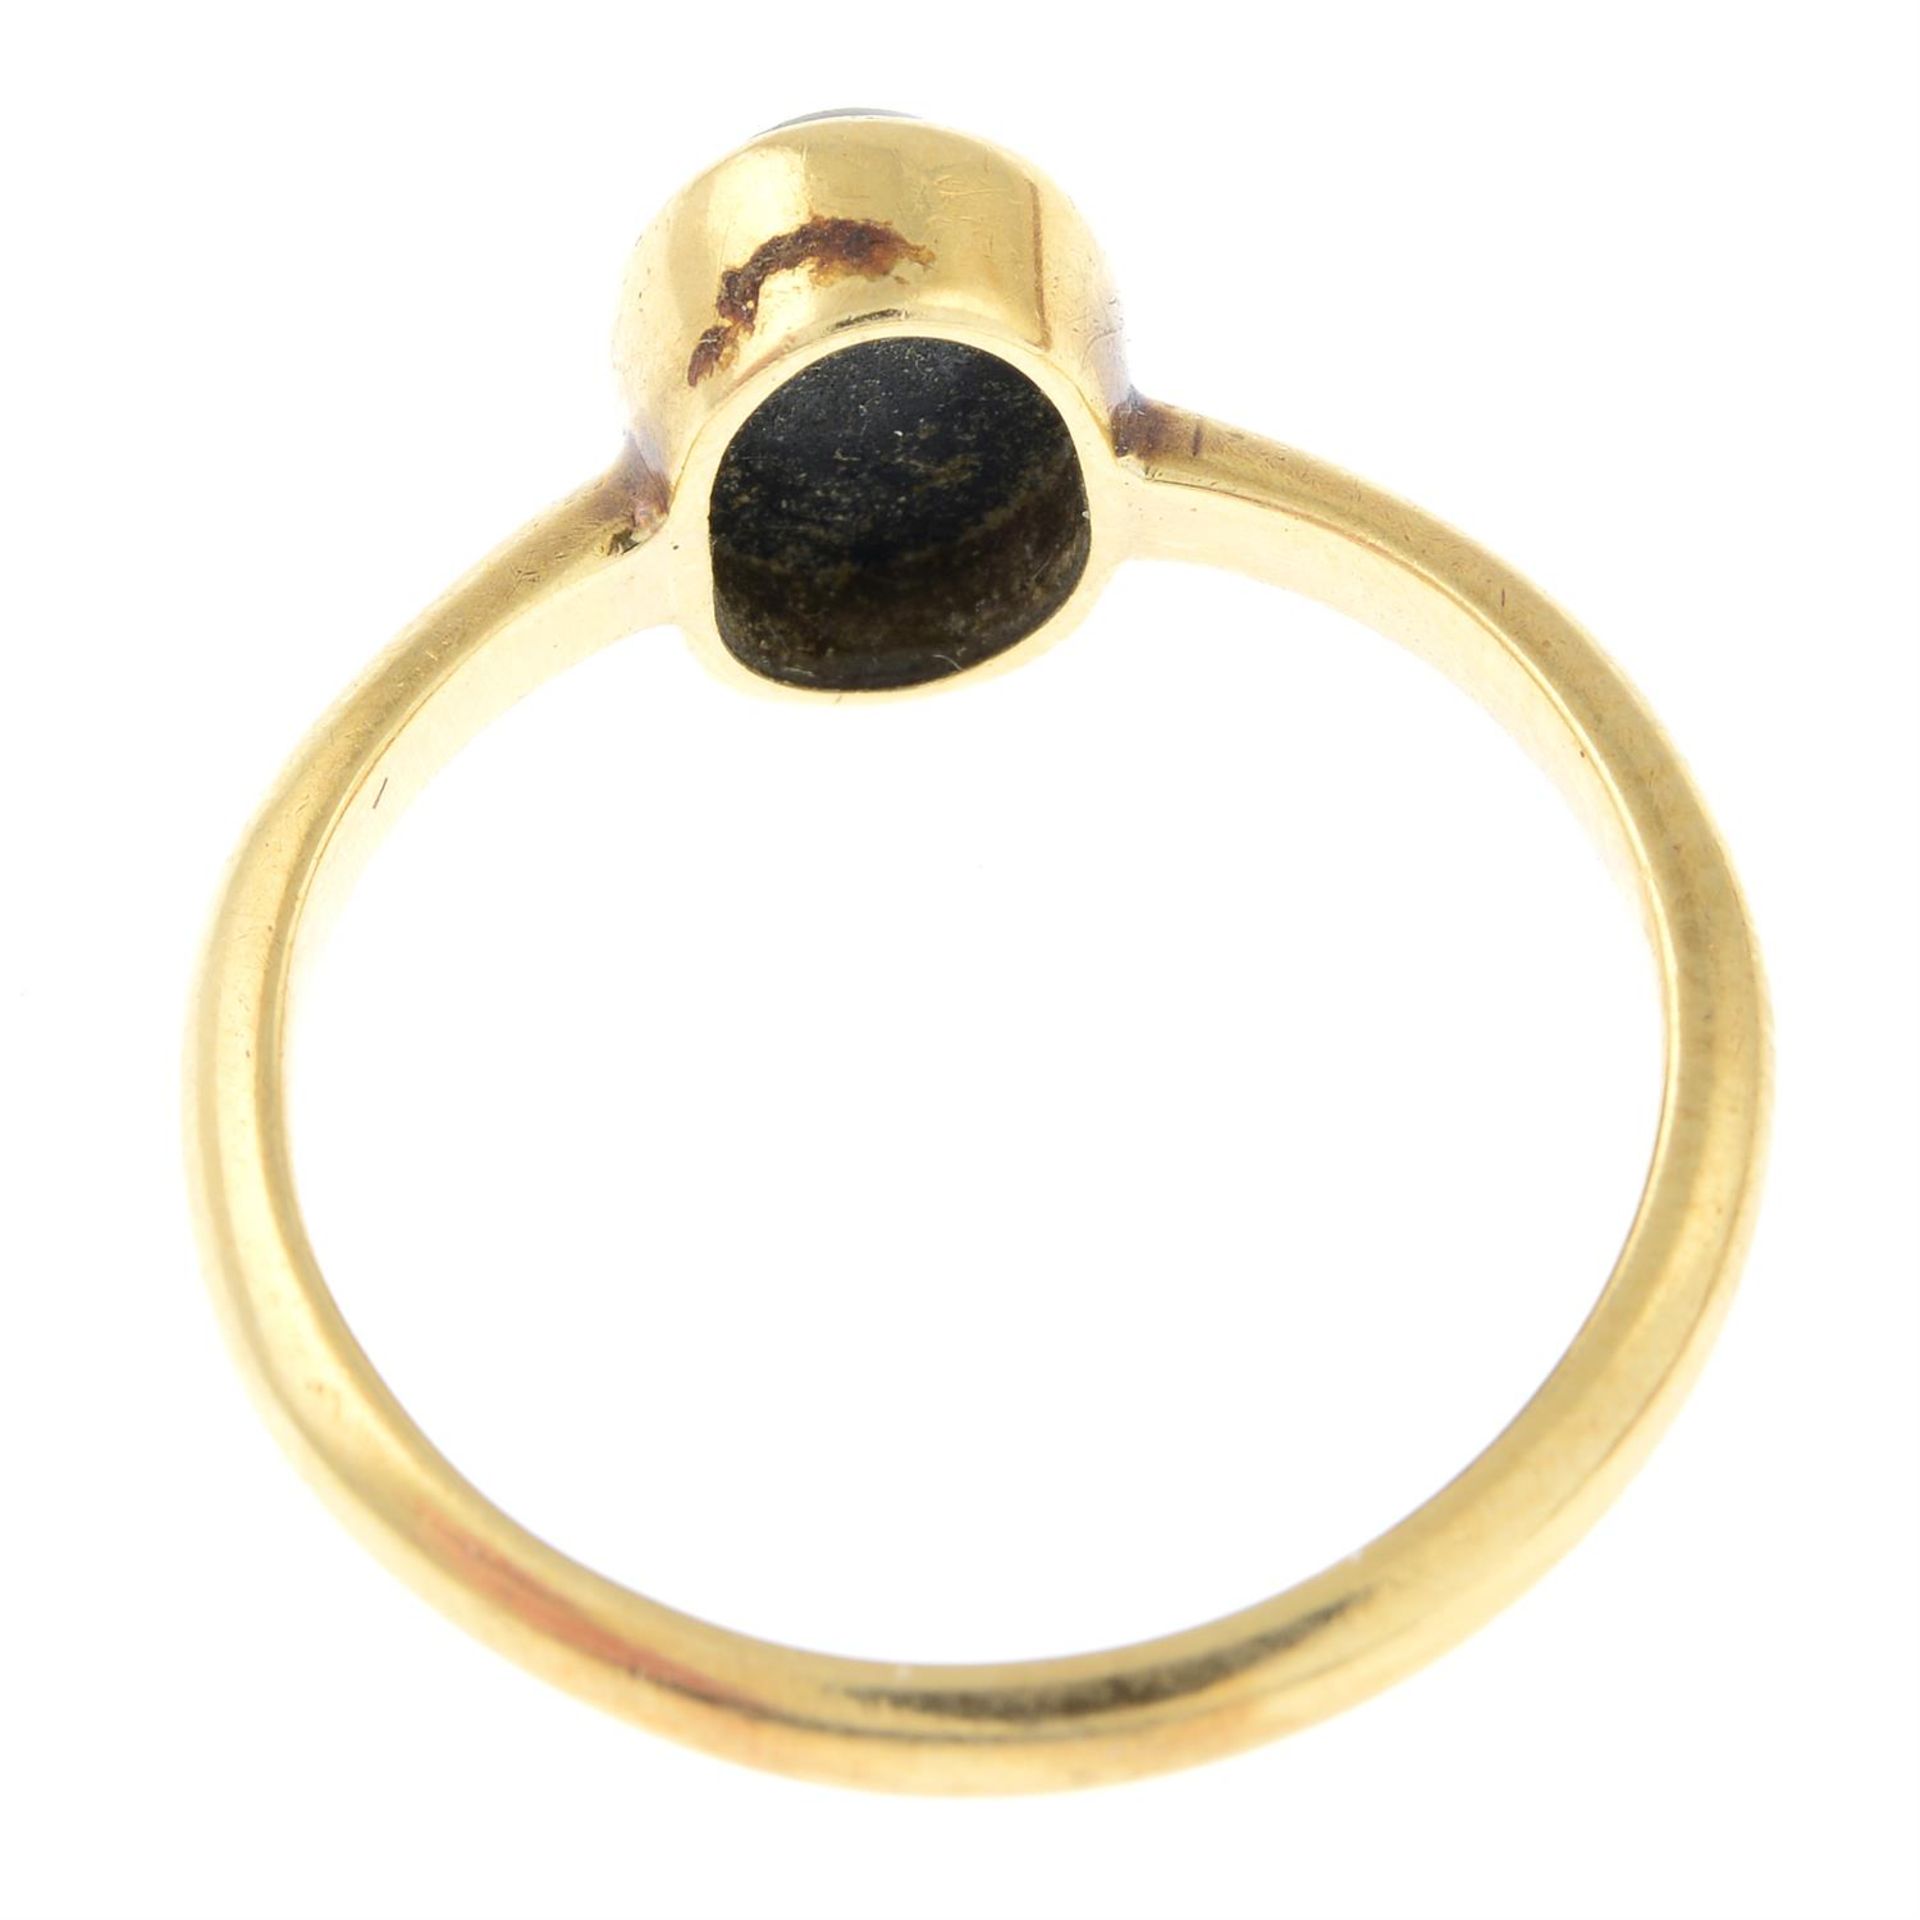 An early 20th century 18ct ring, with later 19th century gold carved banded onyx forget-me-not - Image 2 of 2